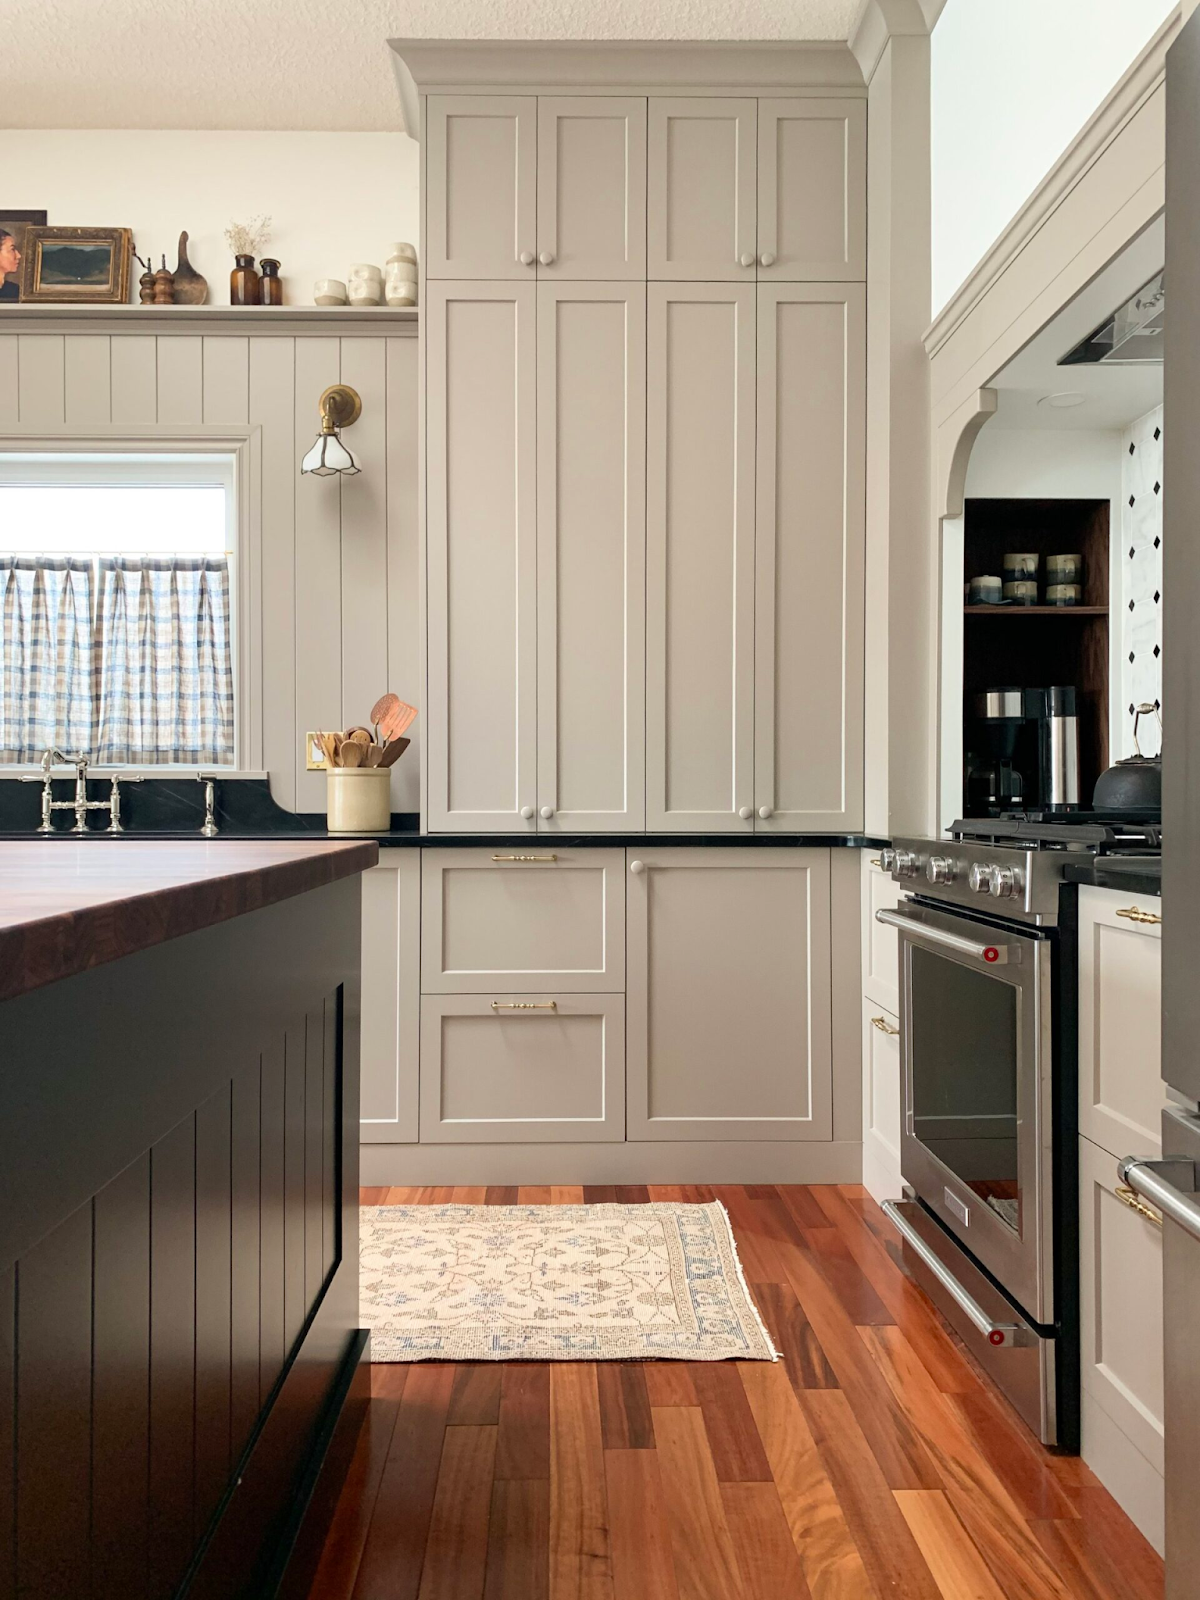 Taupe and Beige Kitchen Cabinet Colors You’ll fall in Love With - Hana ...